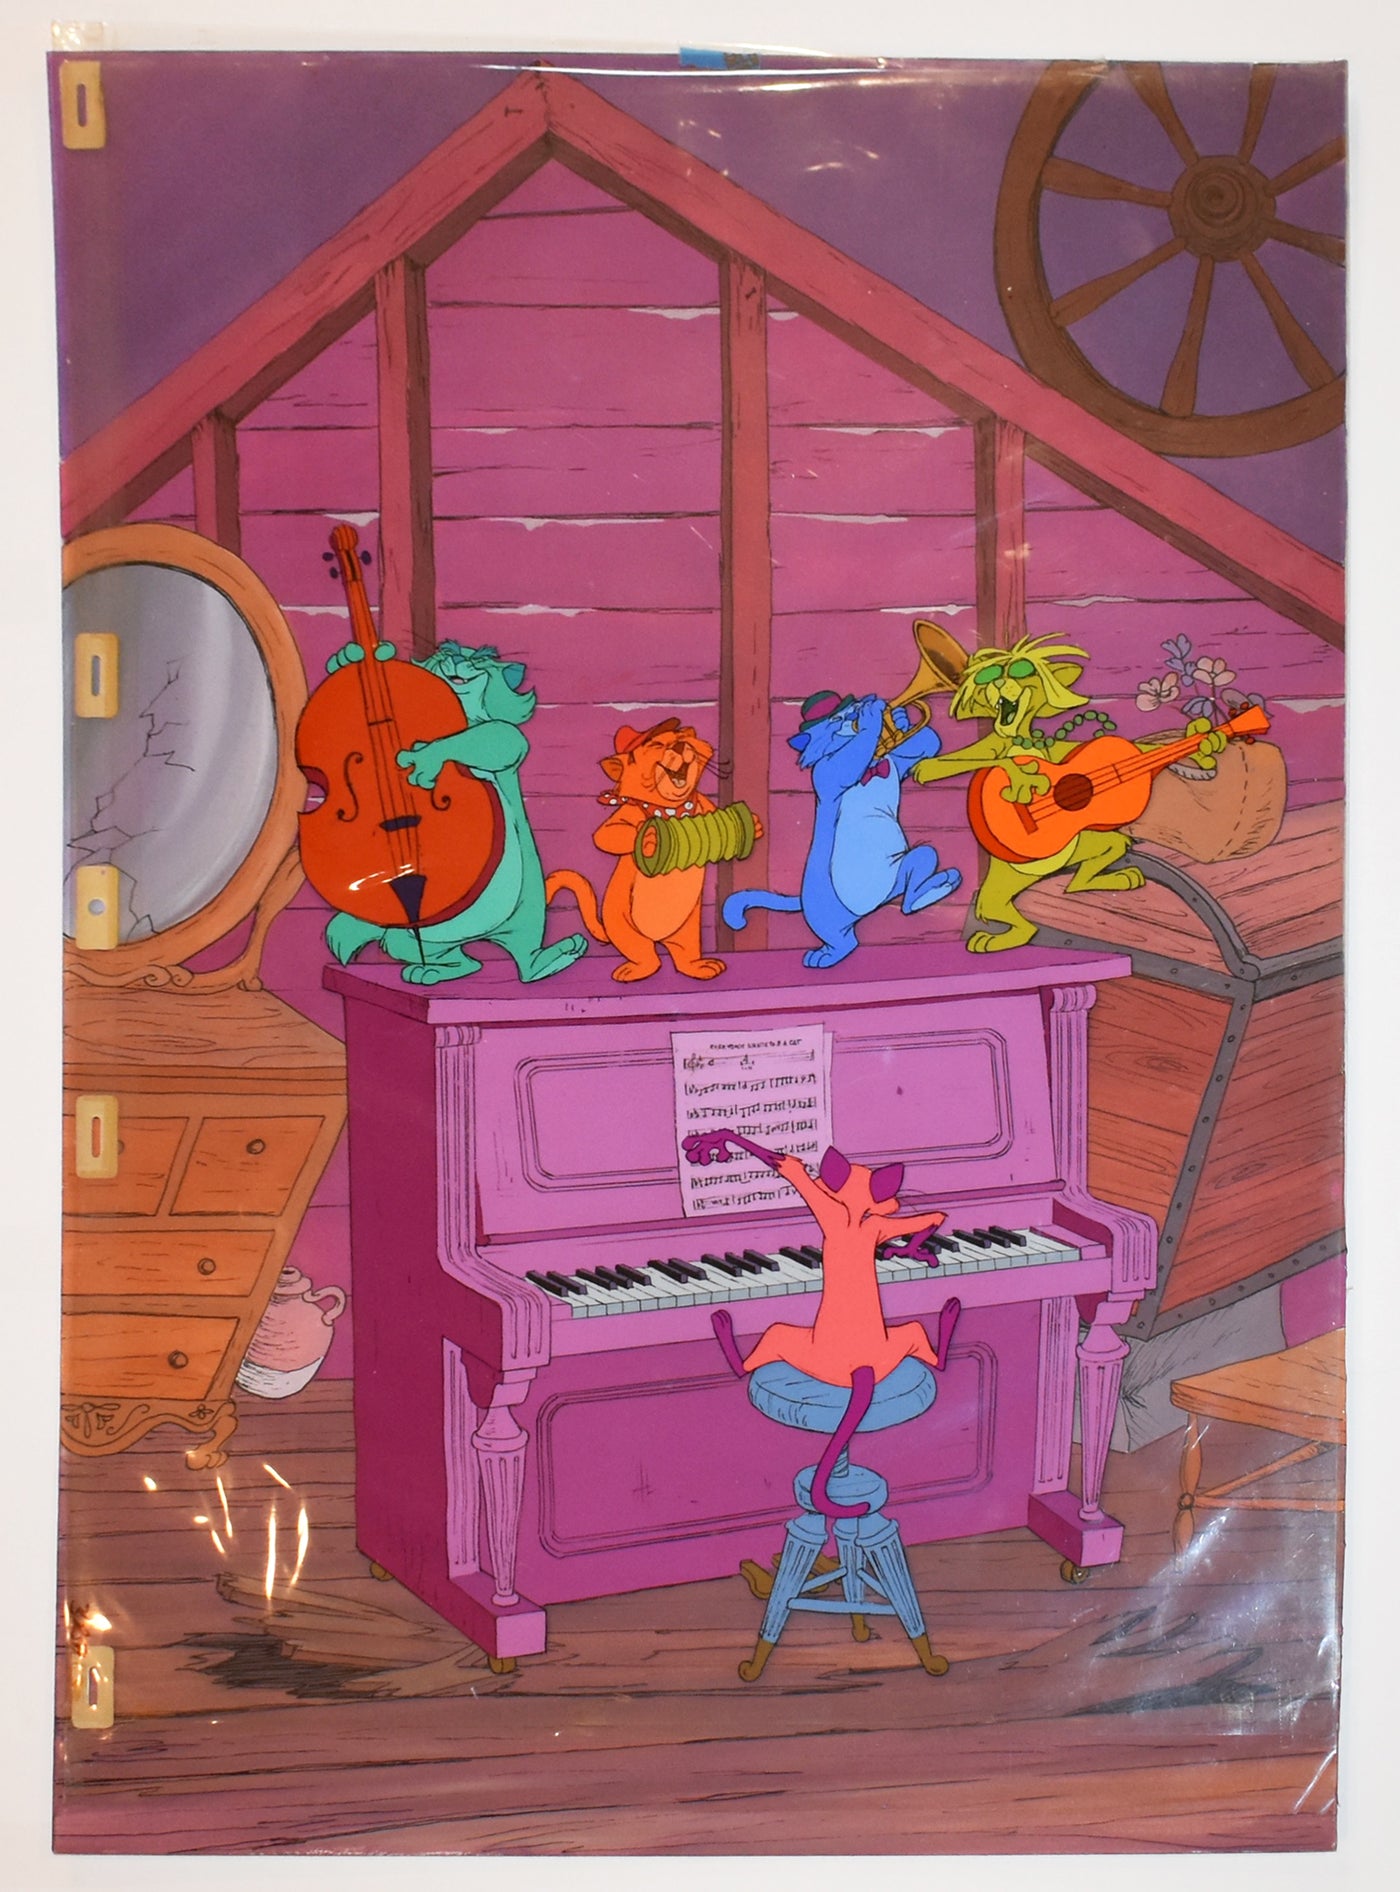 Original Walt Disney Production Cels (3) from The Aristocats featuring Scat Cat and Alley Cats